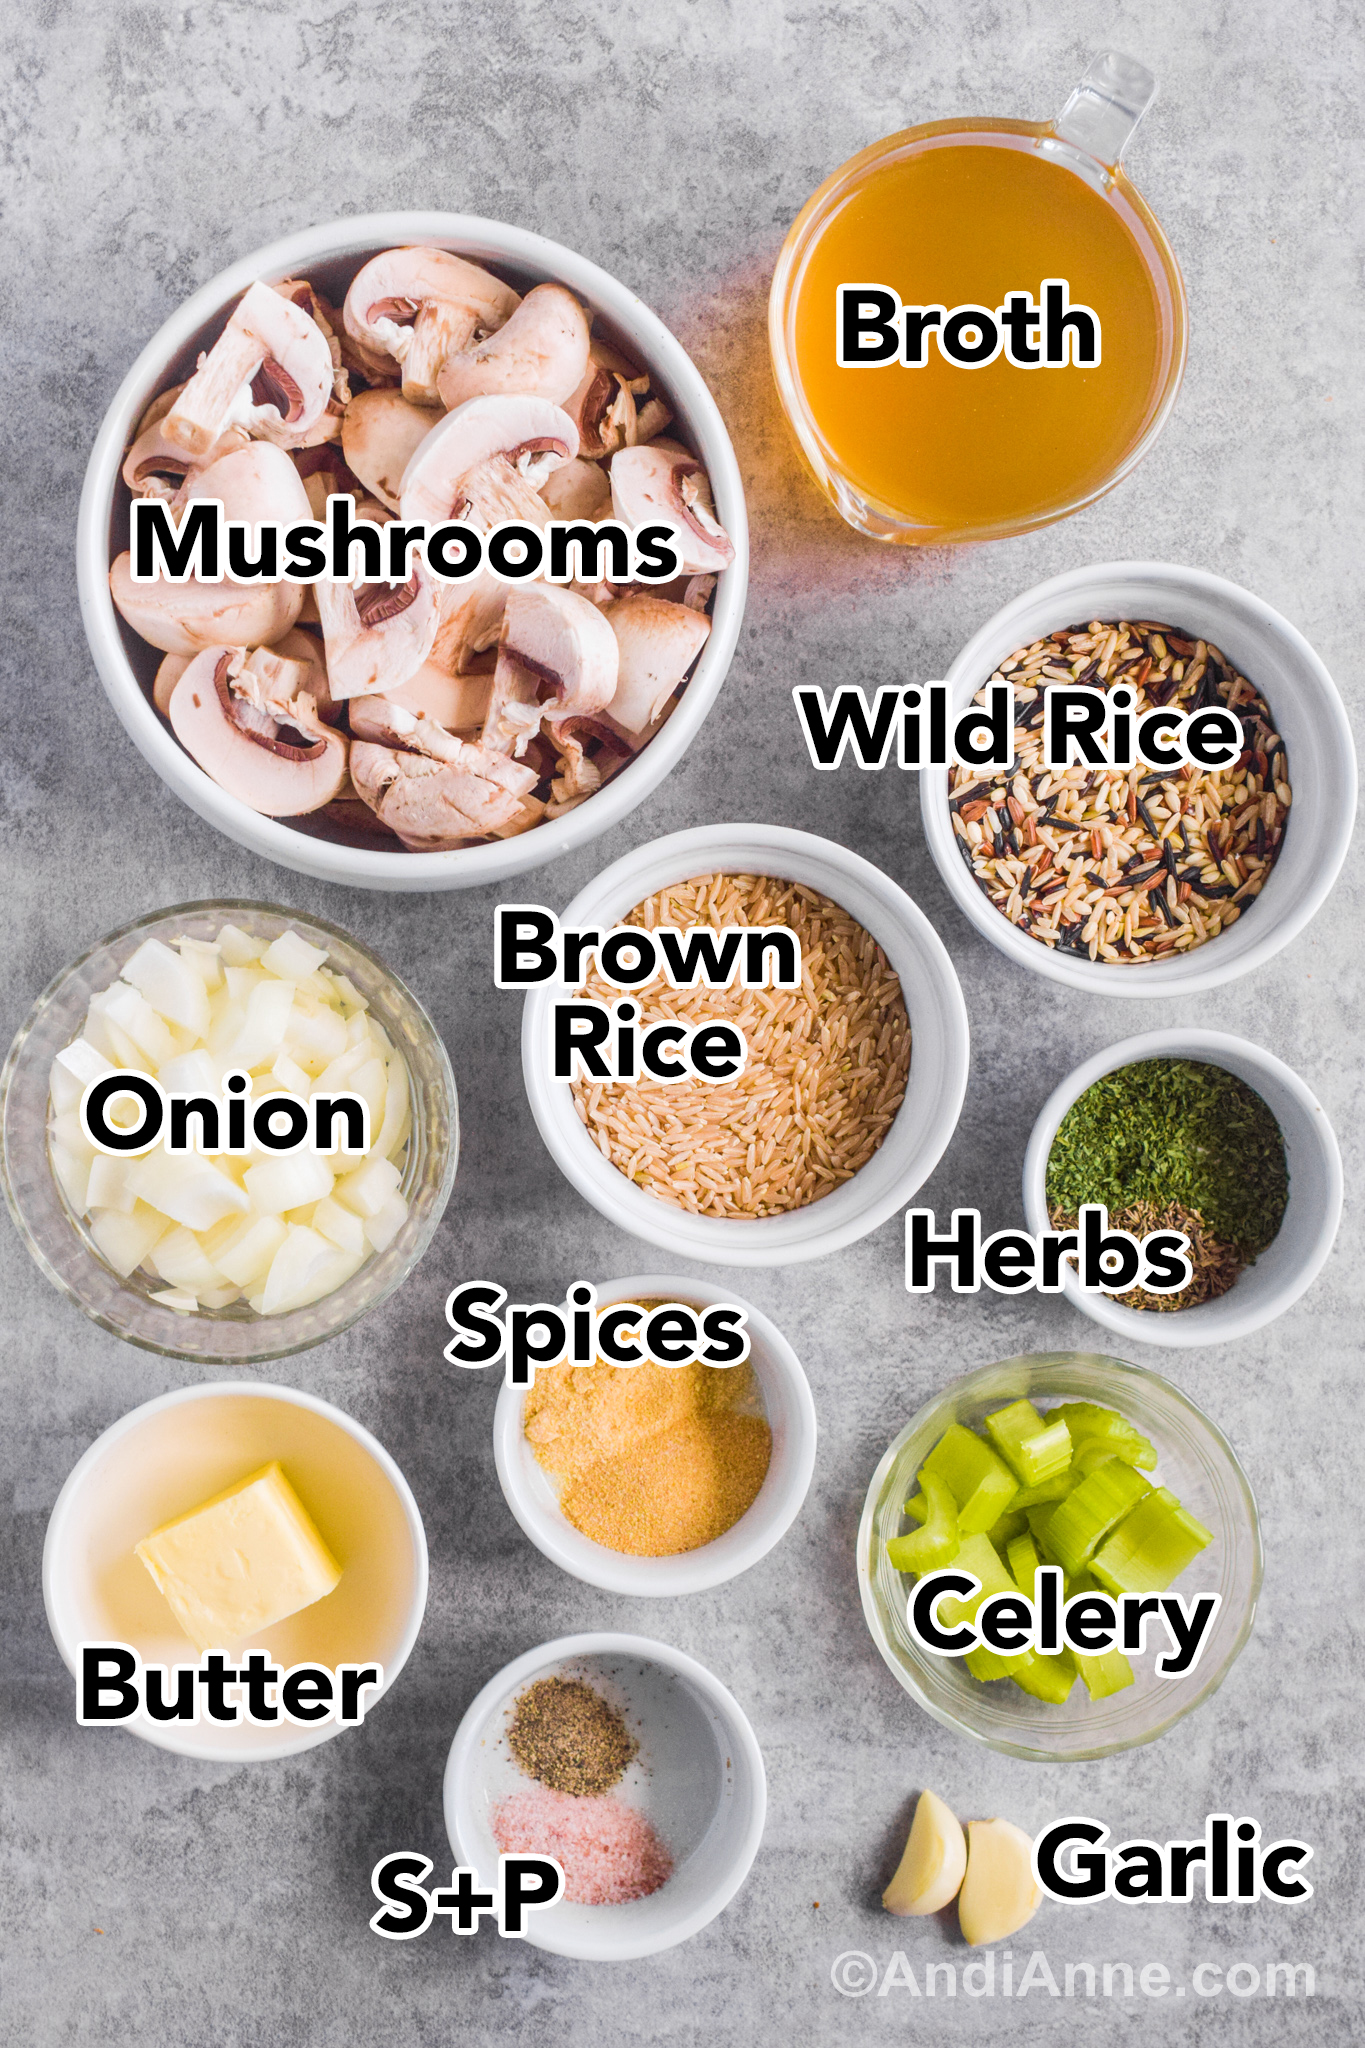 Ingredients in bowls on a counter including sliced mushrooms, wild rice, brown rice, chopped onion, herbs and spices, and celery.